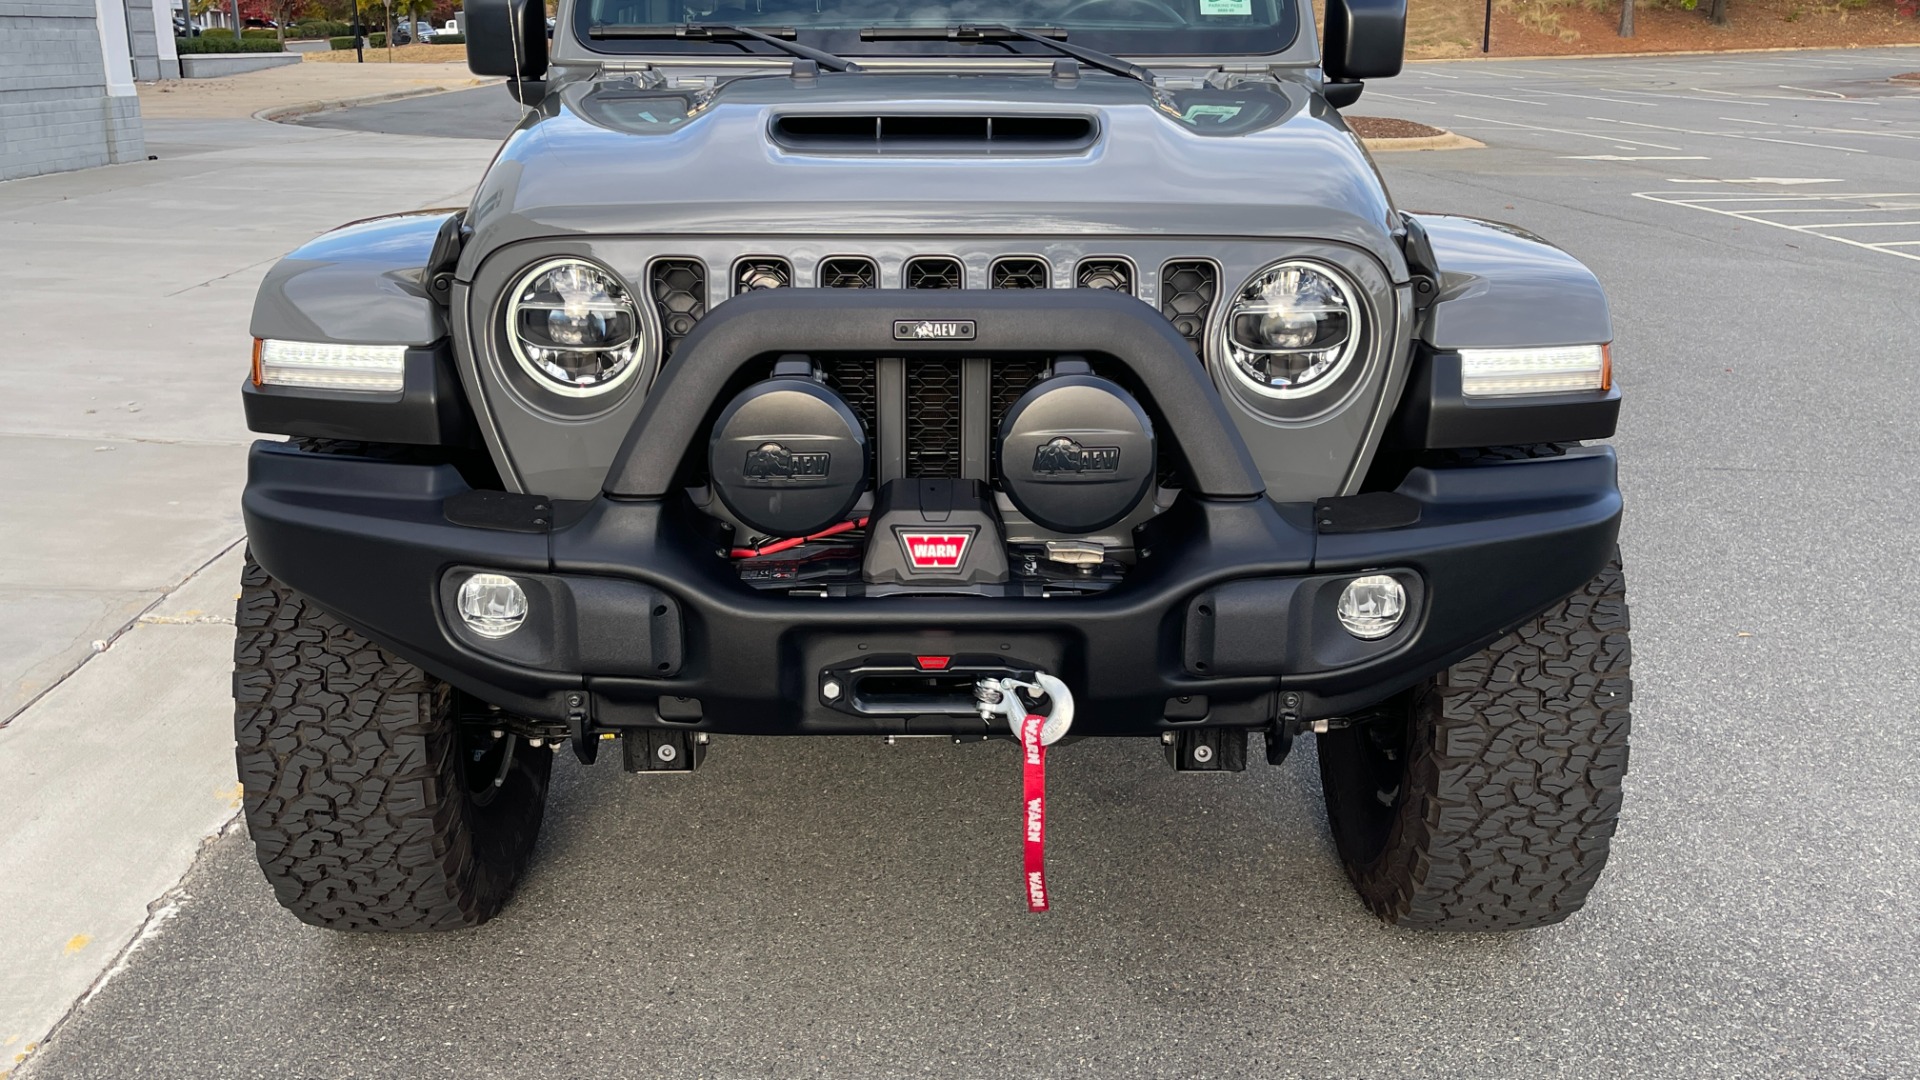 Used 2022 Jeep Wrangler UNLIMITED RUBICON 392 $10K AEV UPGRADES / XTREME RECON / SKY ONE TOUCH for sale $95,798 at Formula Imports in Charlotte NC 28227 9